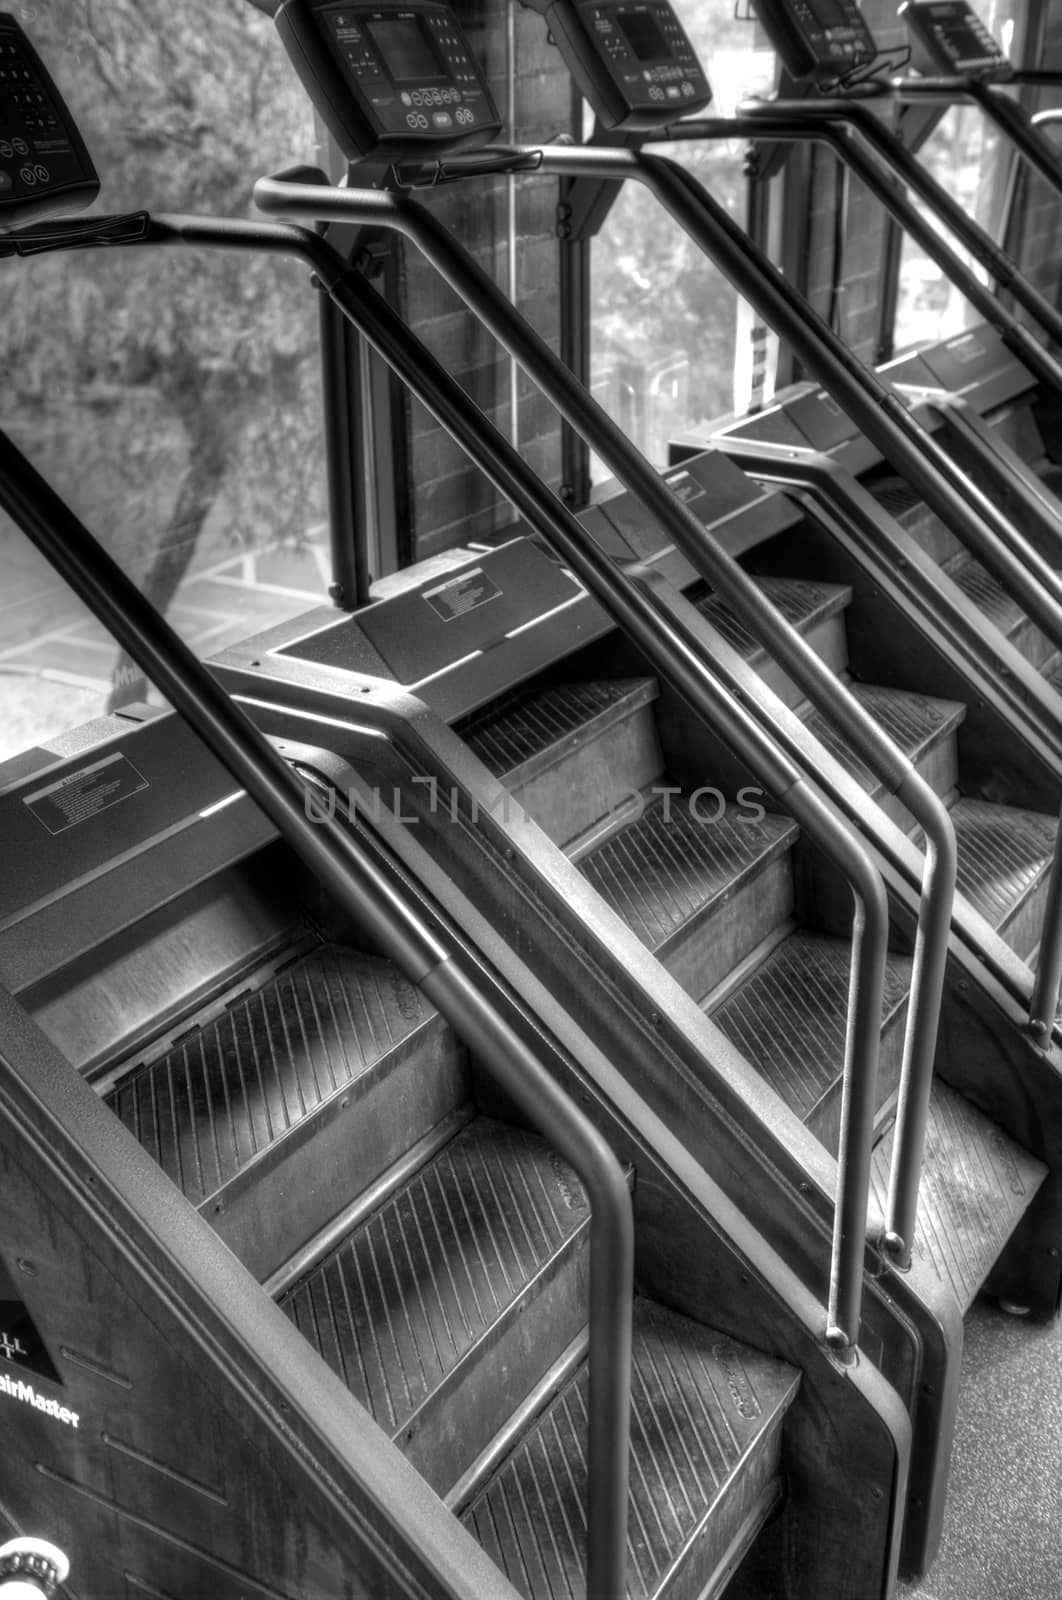 Stair Step Machines at Exercise Gym by pixelsnap